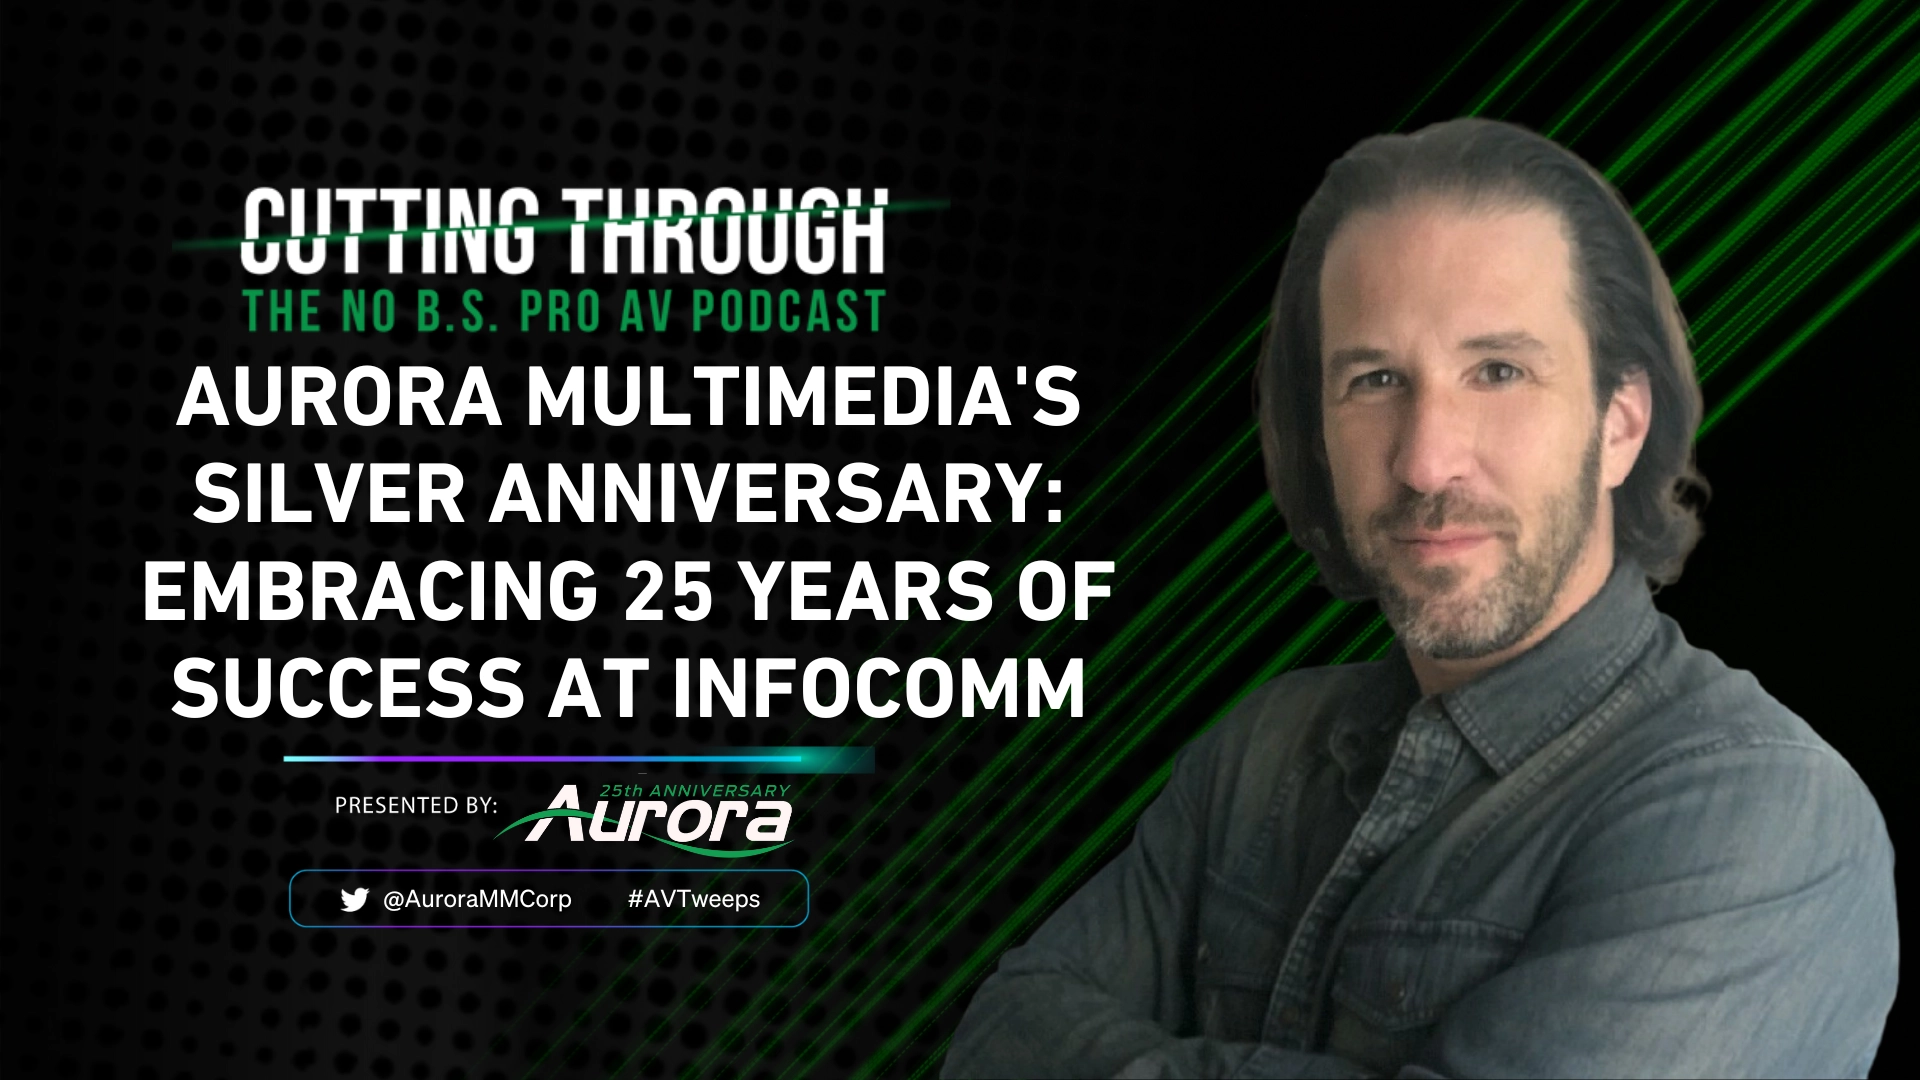 Aurora Multimedia’s Silver Anniversary: Embracing 25 Years of Success at InfoComm